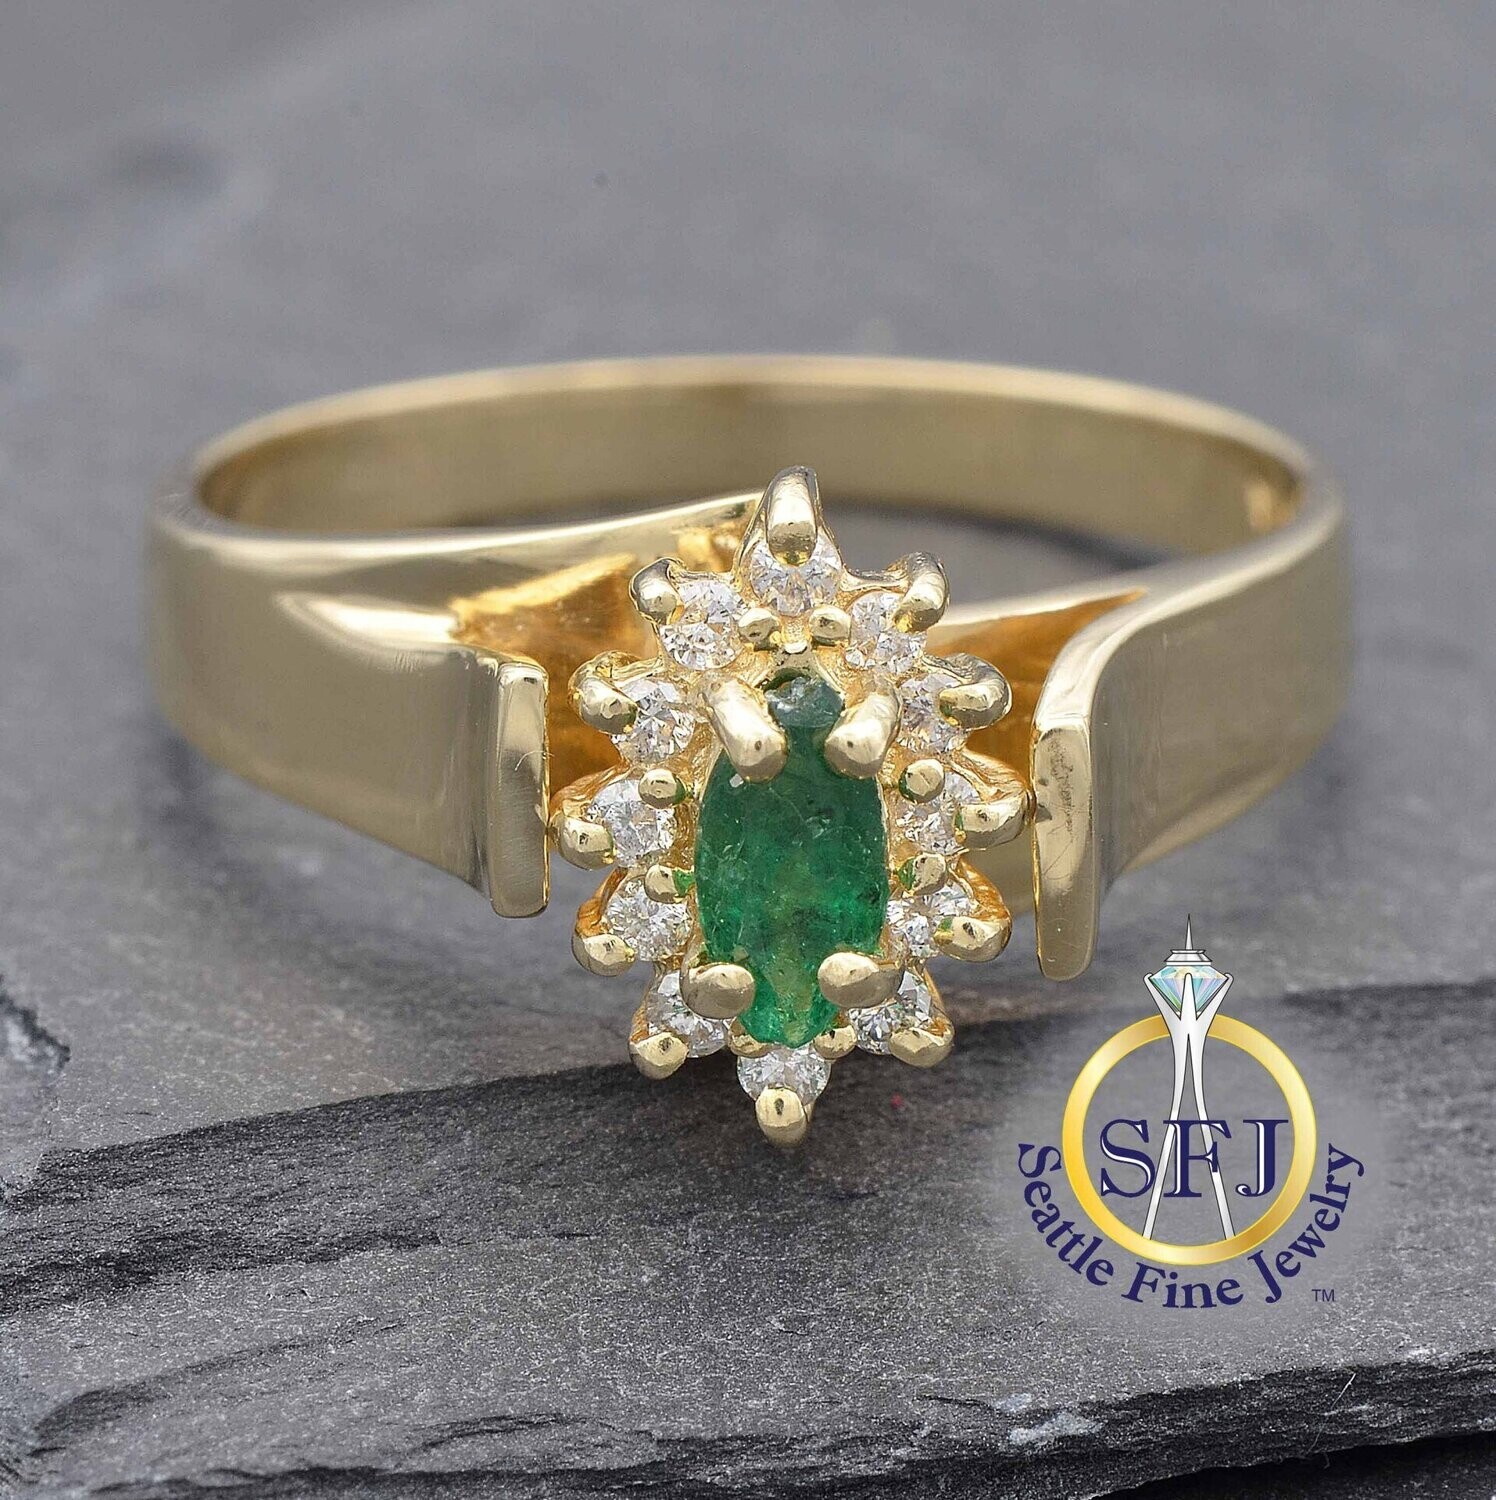 Marquise Emerald and Diamond Halo Ring, Solid 14K Yellow Gold. $1,535  Appraised Value